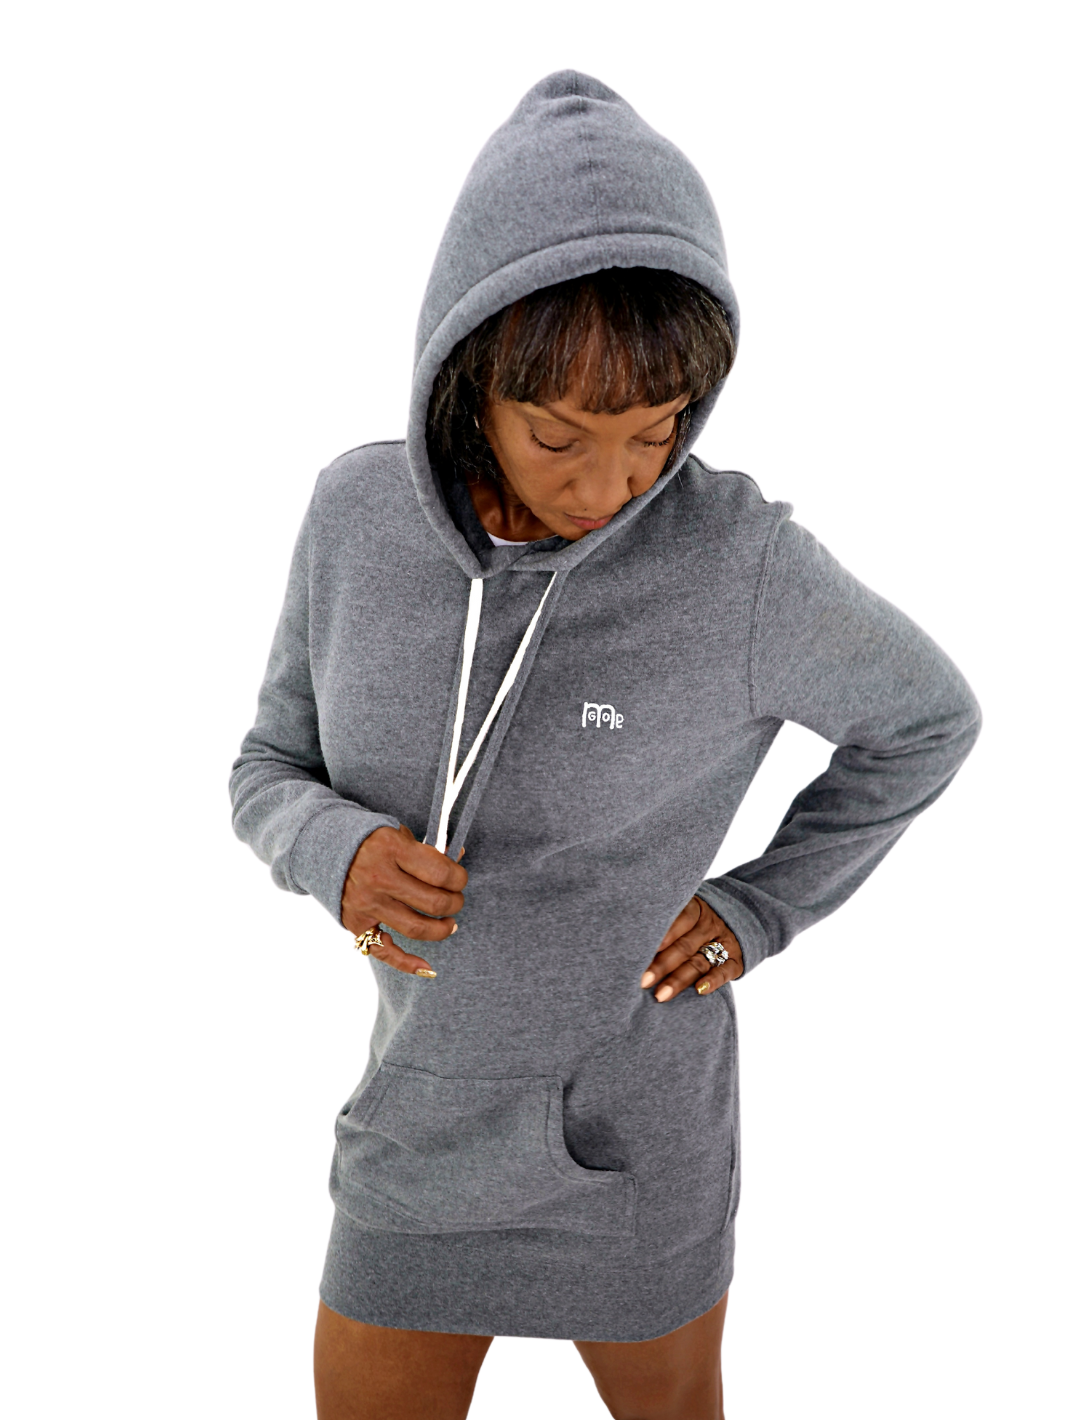 Grey GODinme Hoodie Dress made with superior quality of luxurious materials: Featuring our signature creme embroidered GODinme logo, two drawcords, and thumb hole cuff sleeves.